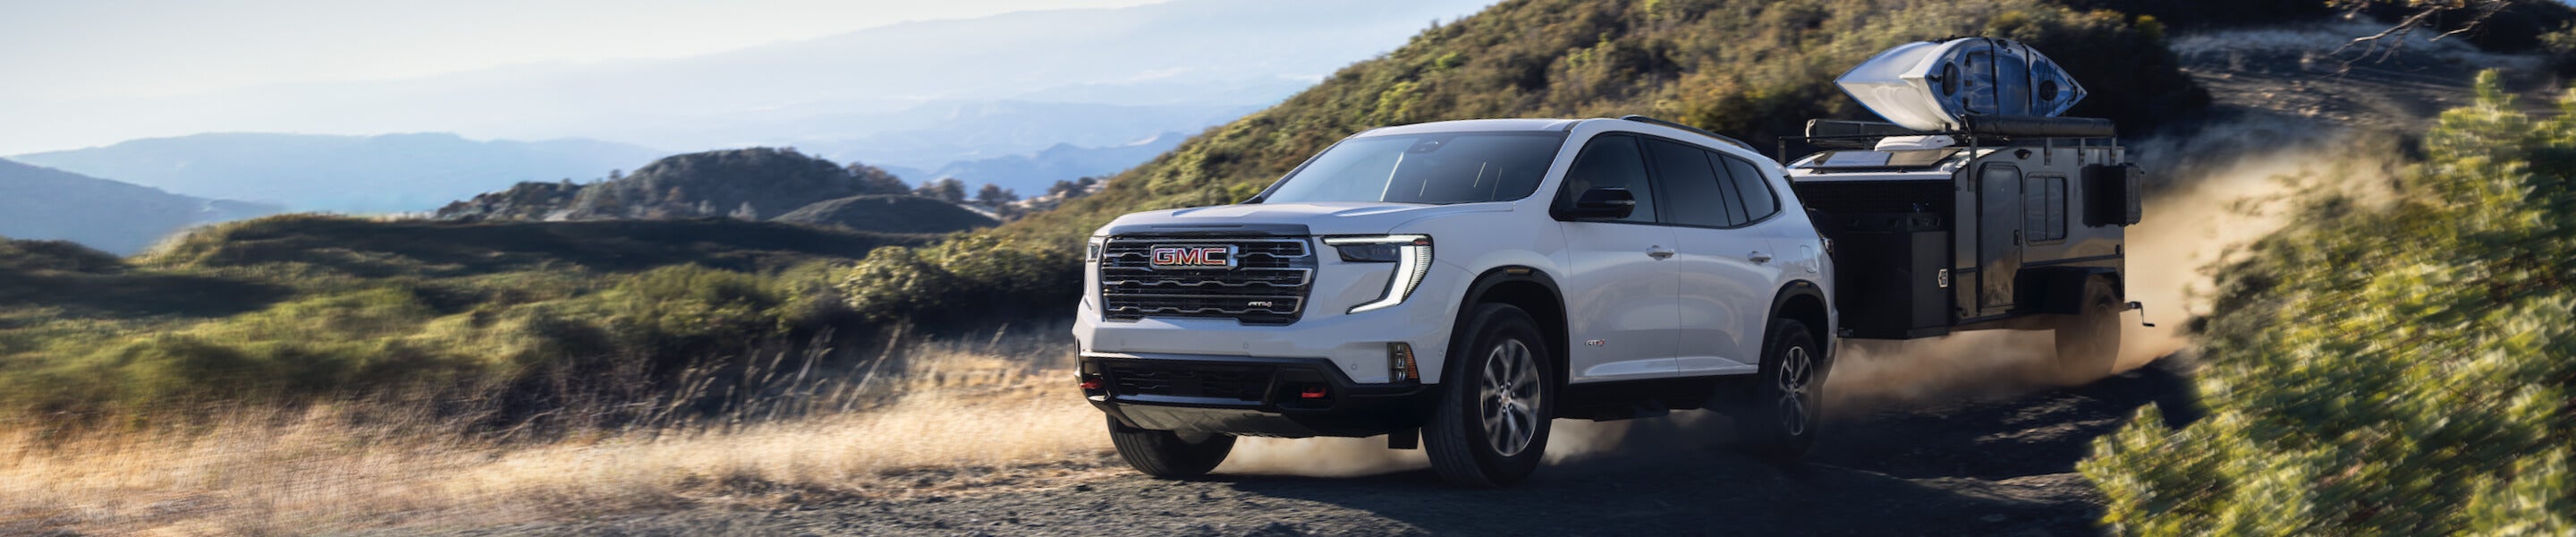 New GMC Lease Deals